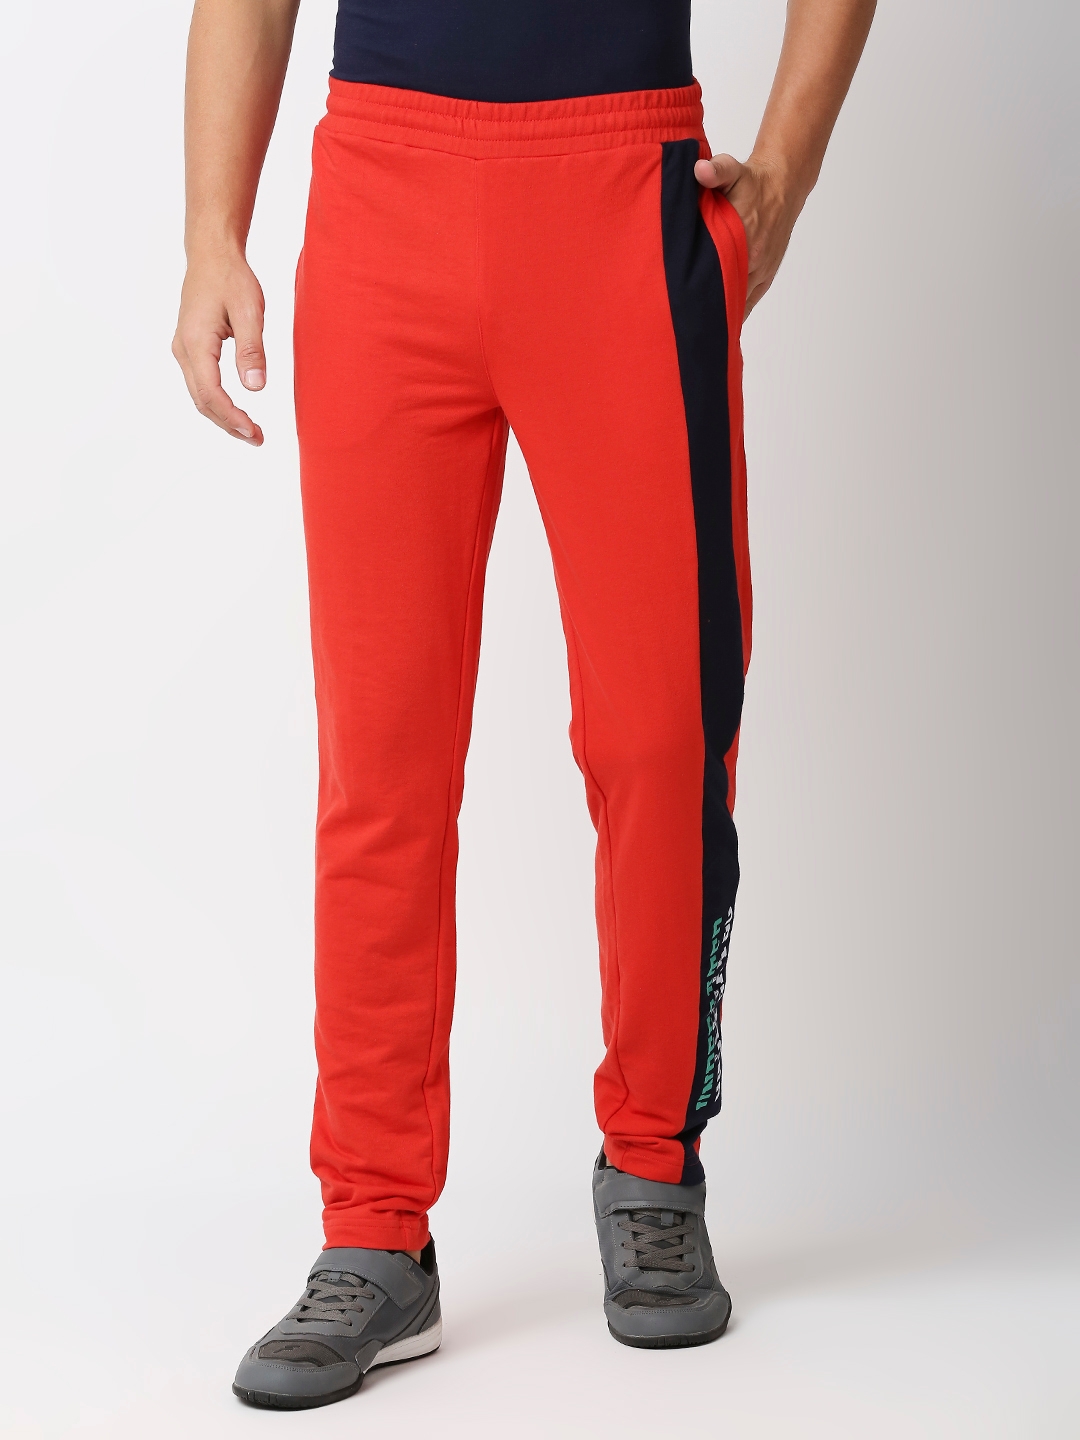 FITZ | Men's Slim Fit Red Cotton Blend Casual Joogers